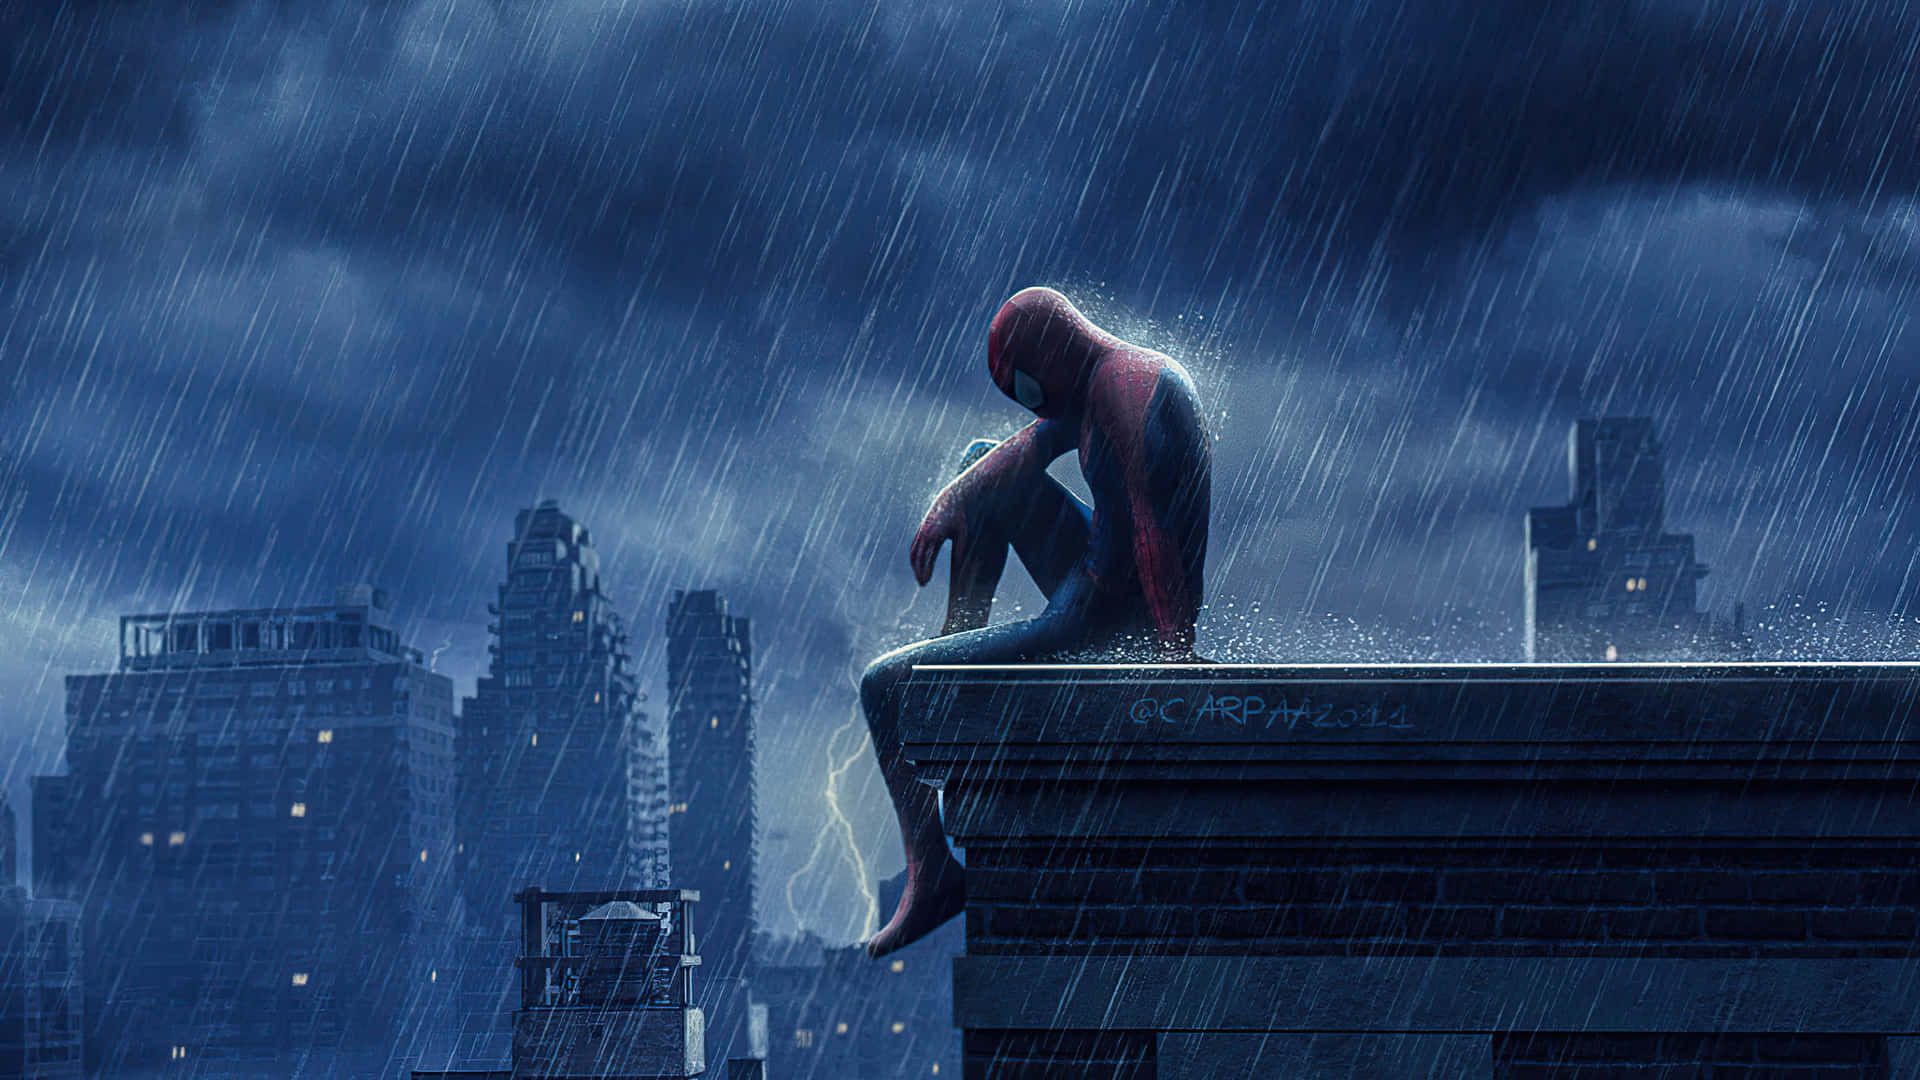 Spider-Man: No Way Home Comes To The Big Screen